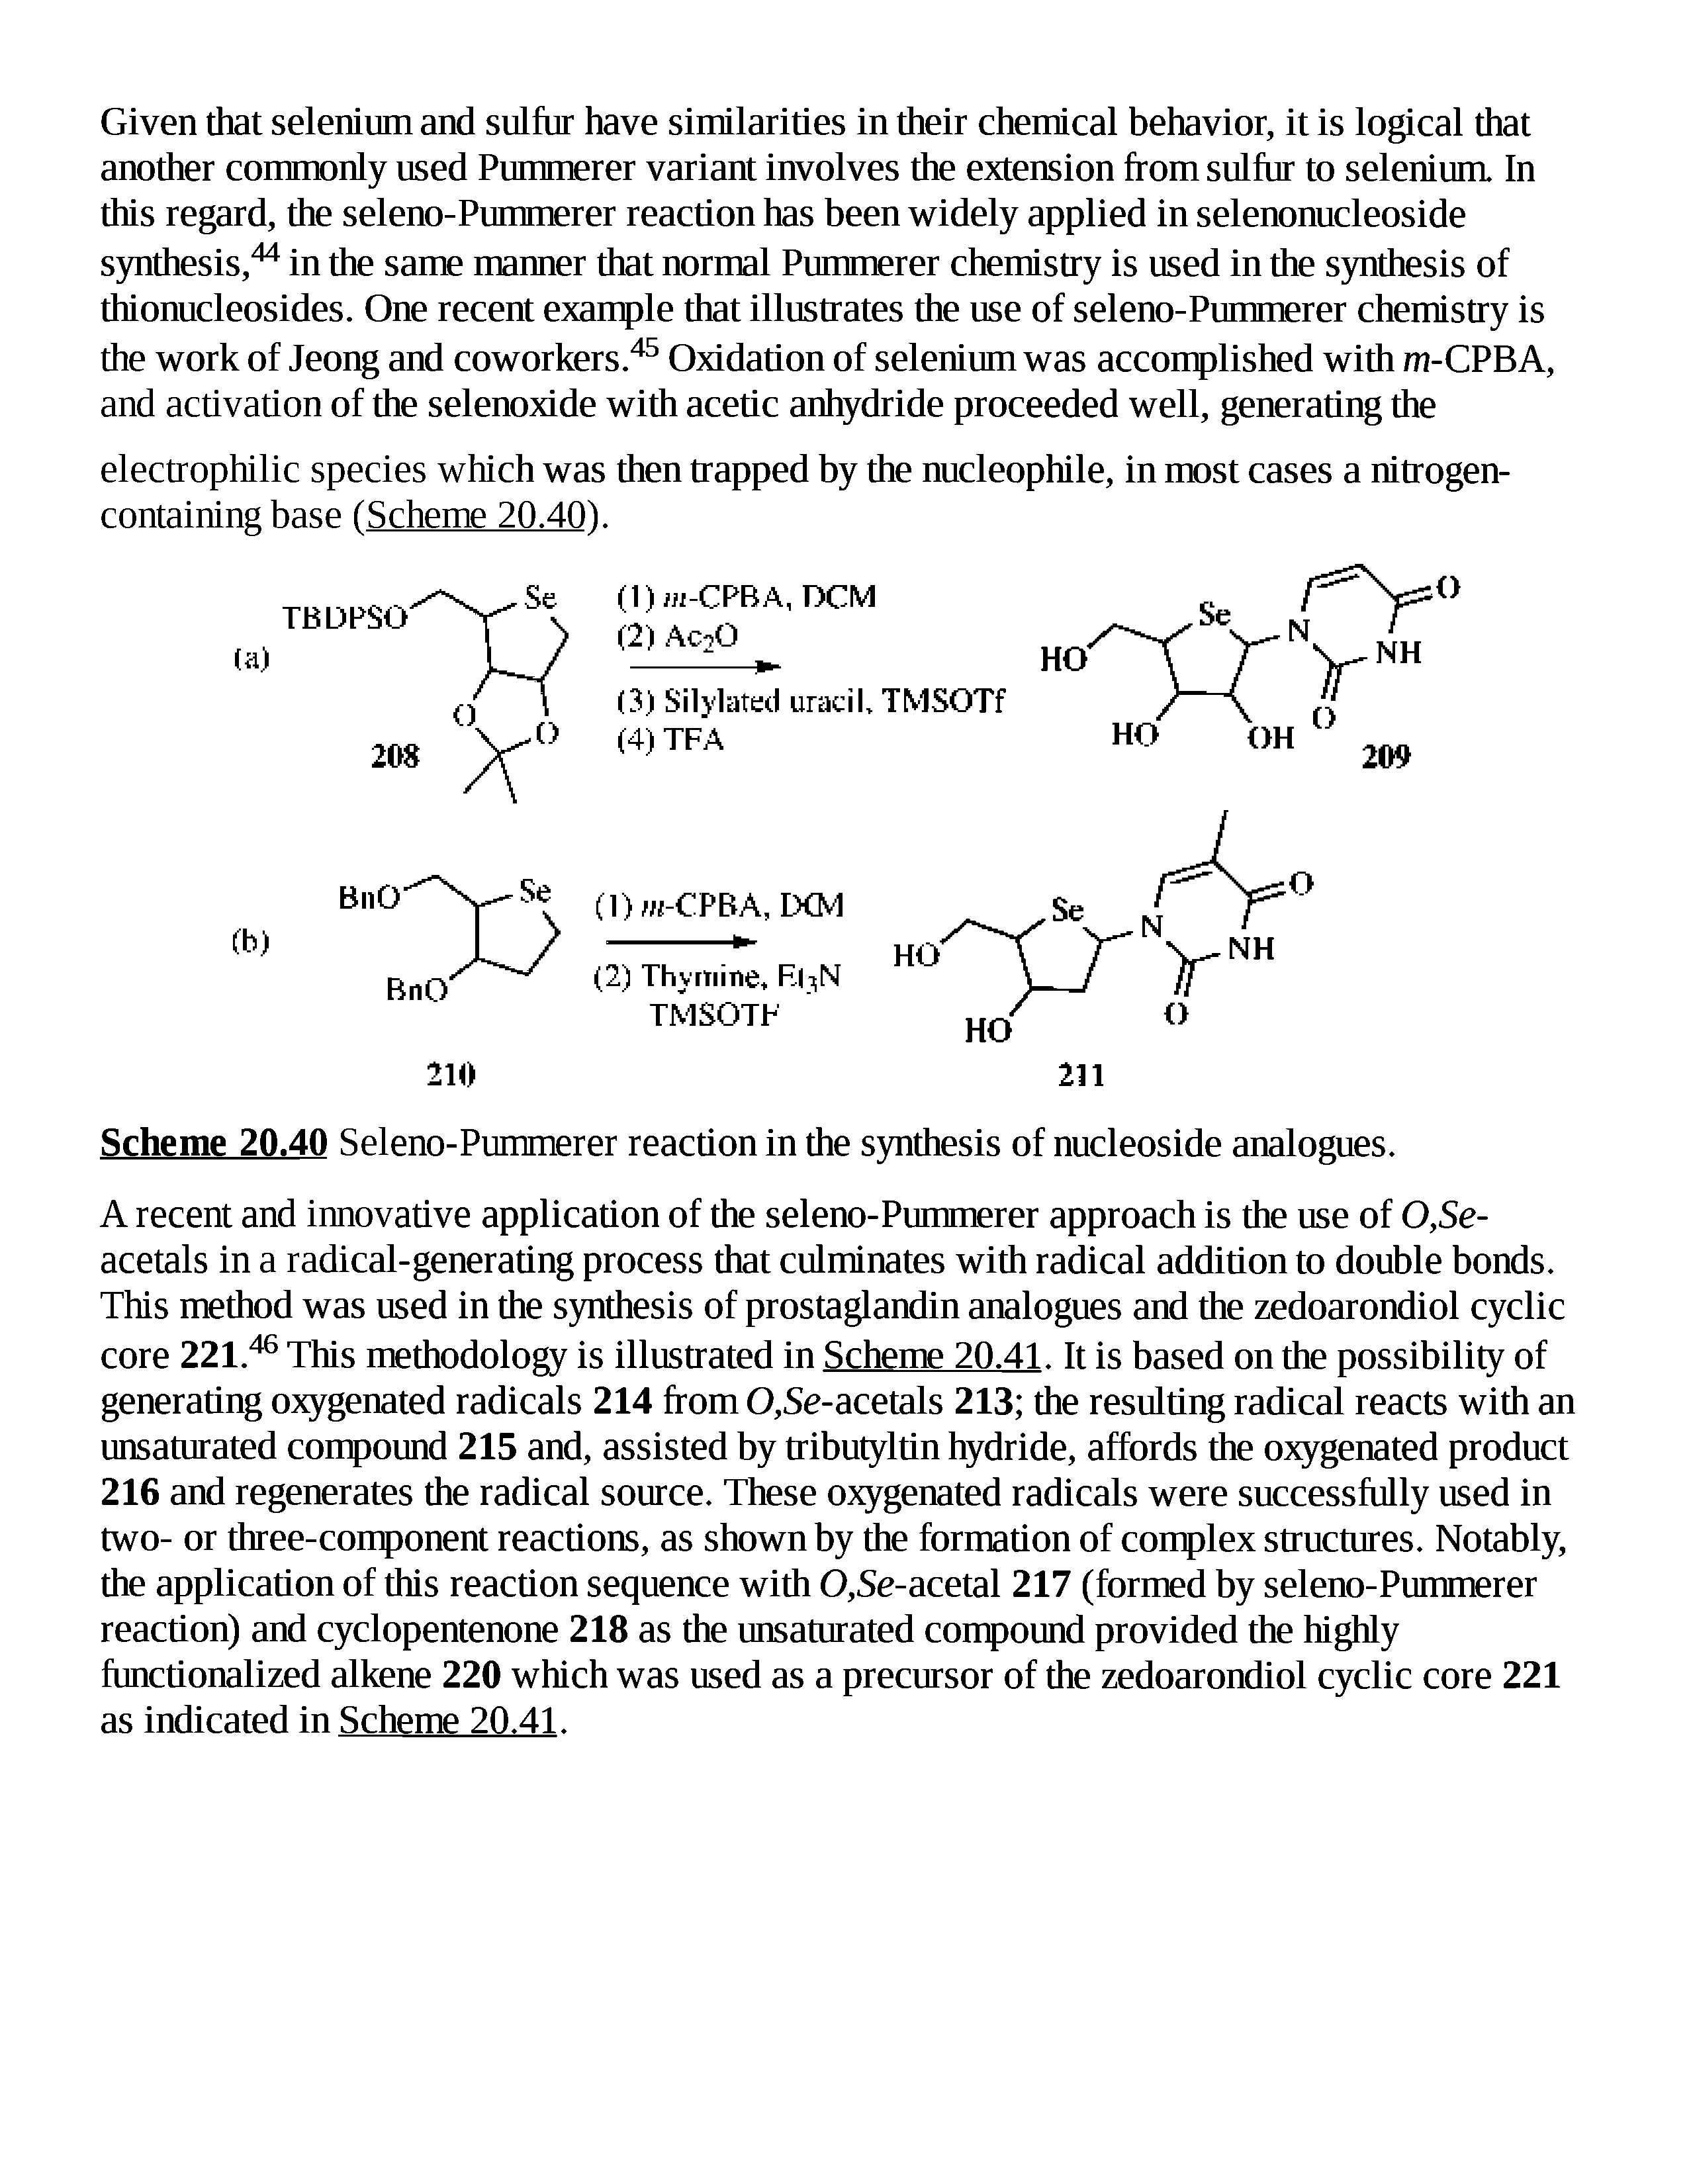 Scheme 20.40 Seleno-Pummerer reaction in the synthesis of nucleoside analogues.